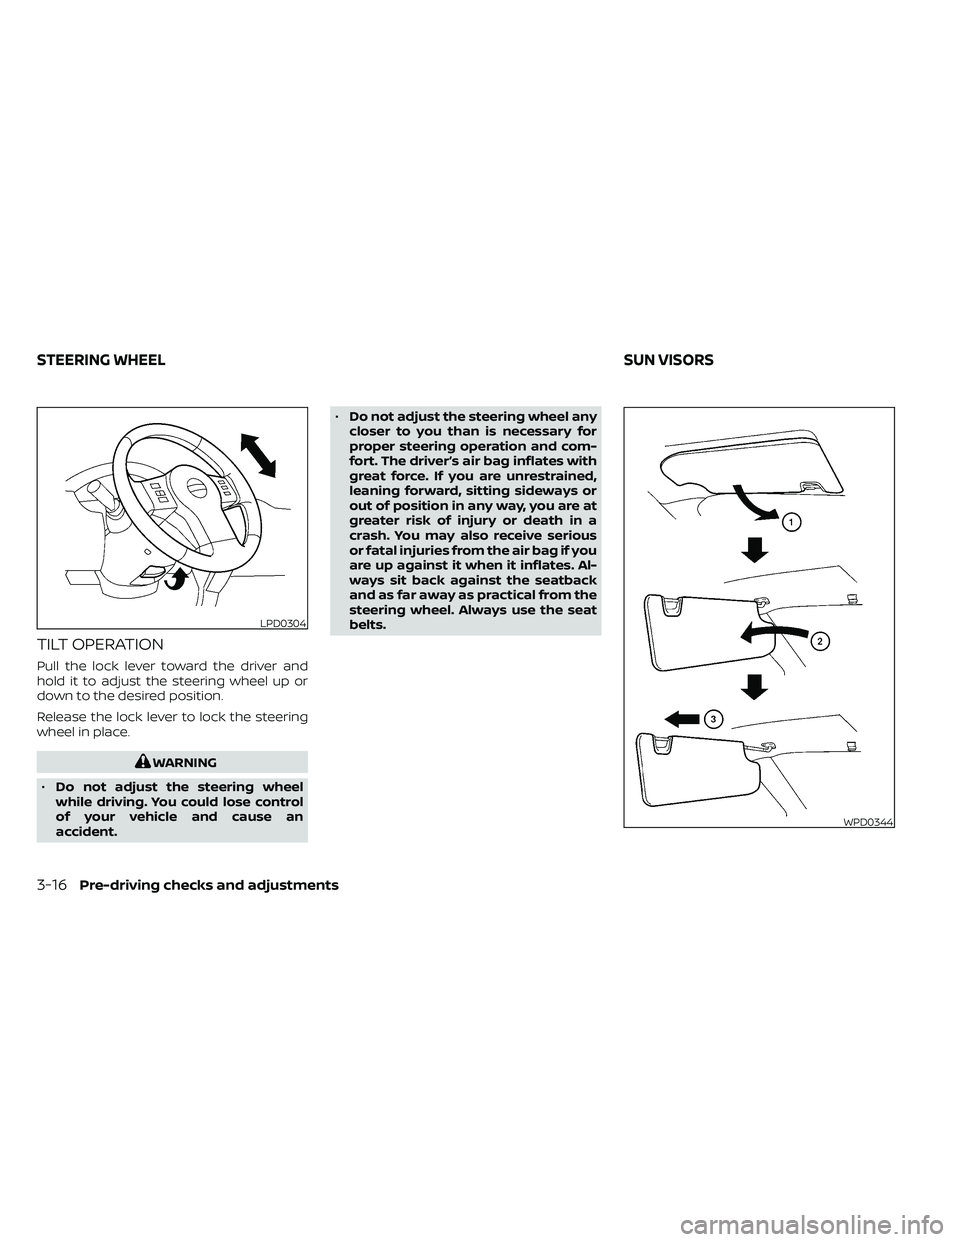 NISSAN FRONTIER 2021 User Guide TILT OPERATION
Pull the lock lever toward the driver and
hold it to adjust the steering wheel up or
down to the desired position.
Release the lock lever to lock the steering
wheel in place.
WPD0344
ST